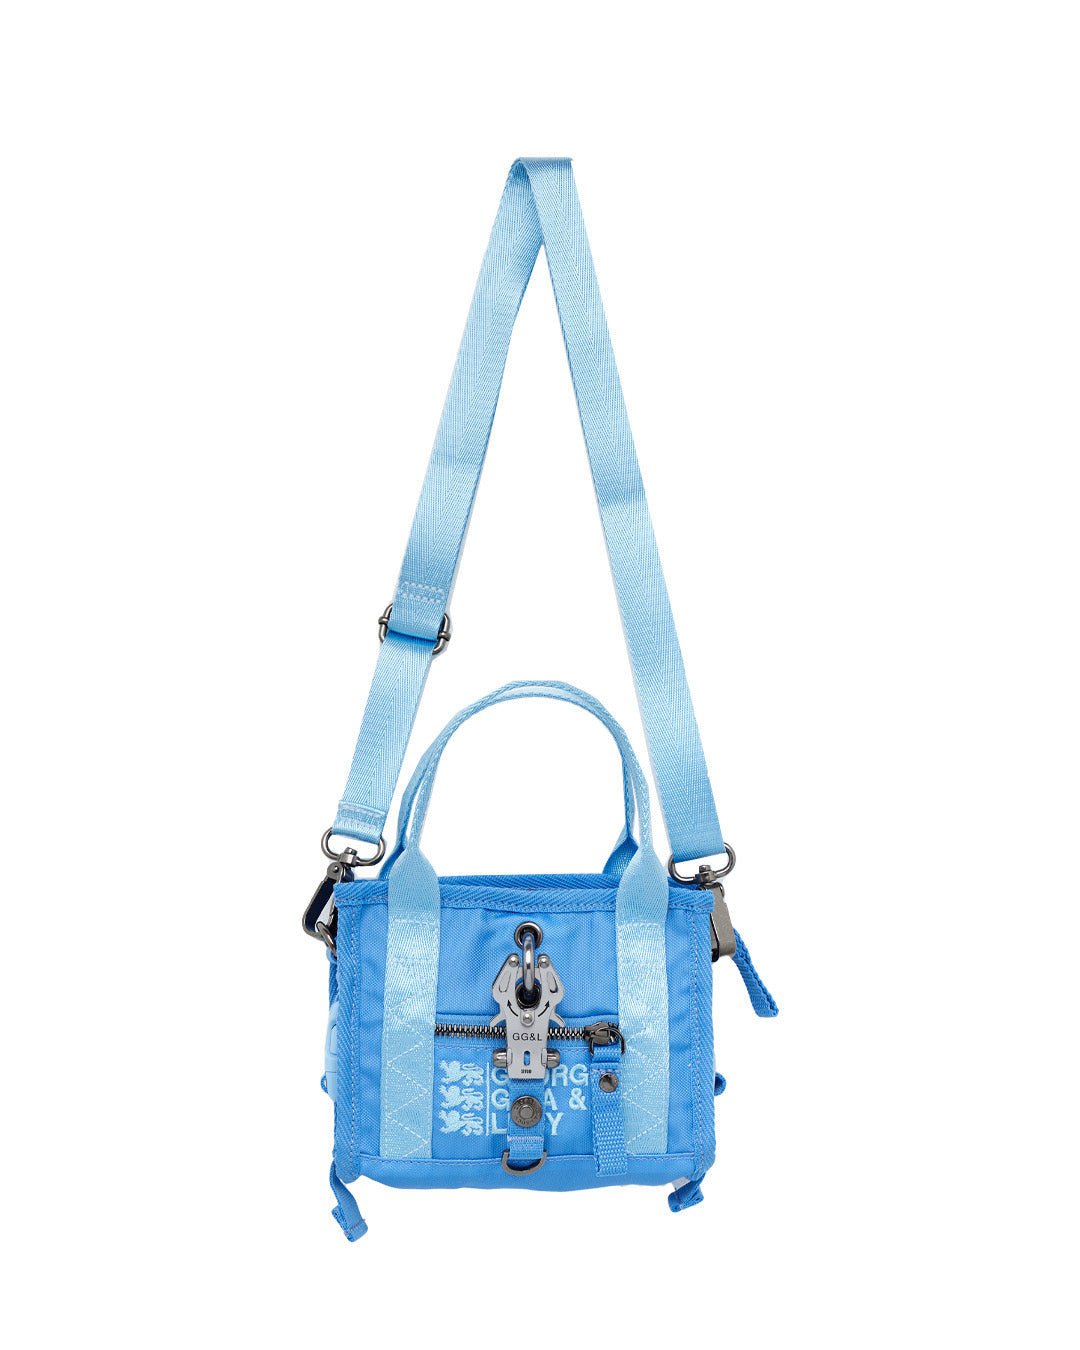 Mini blue crossbody/handbag with silver buckle and removable strap. Made by German designer George Gina & Lucy. Sold in Melbourne clothing boutique called Error404store.